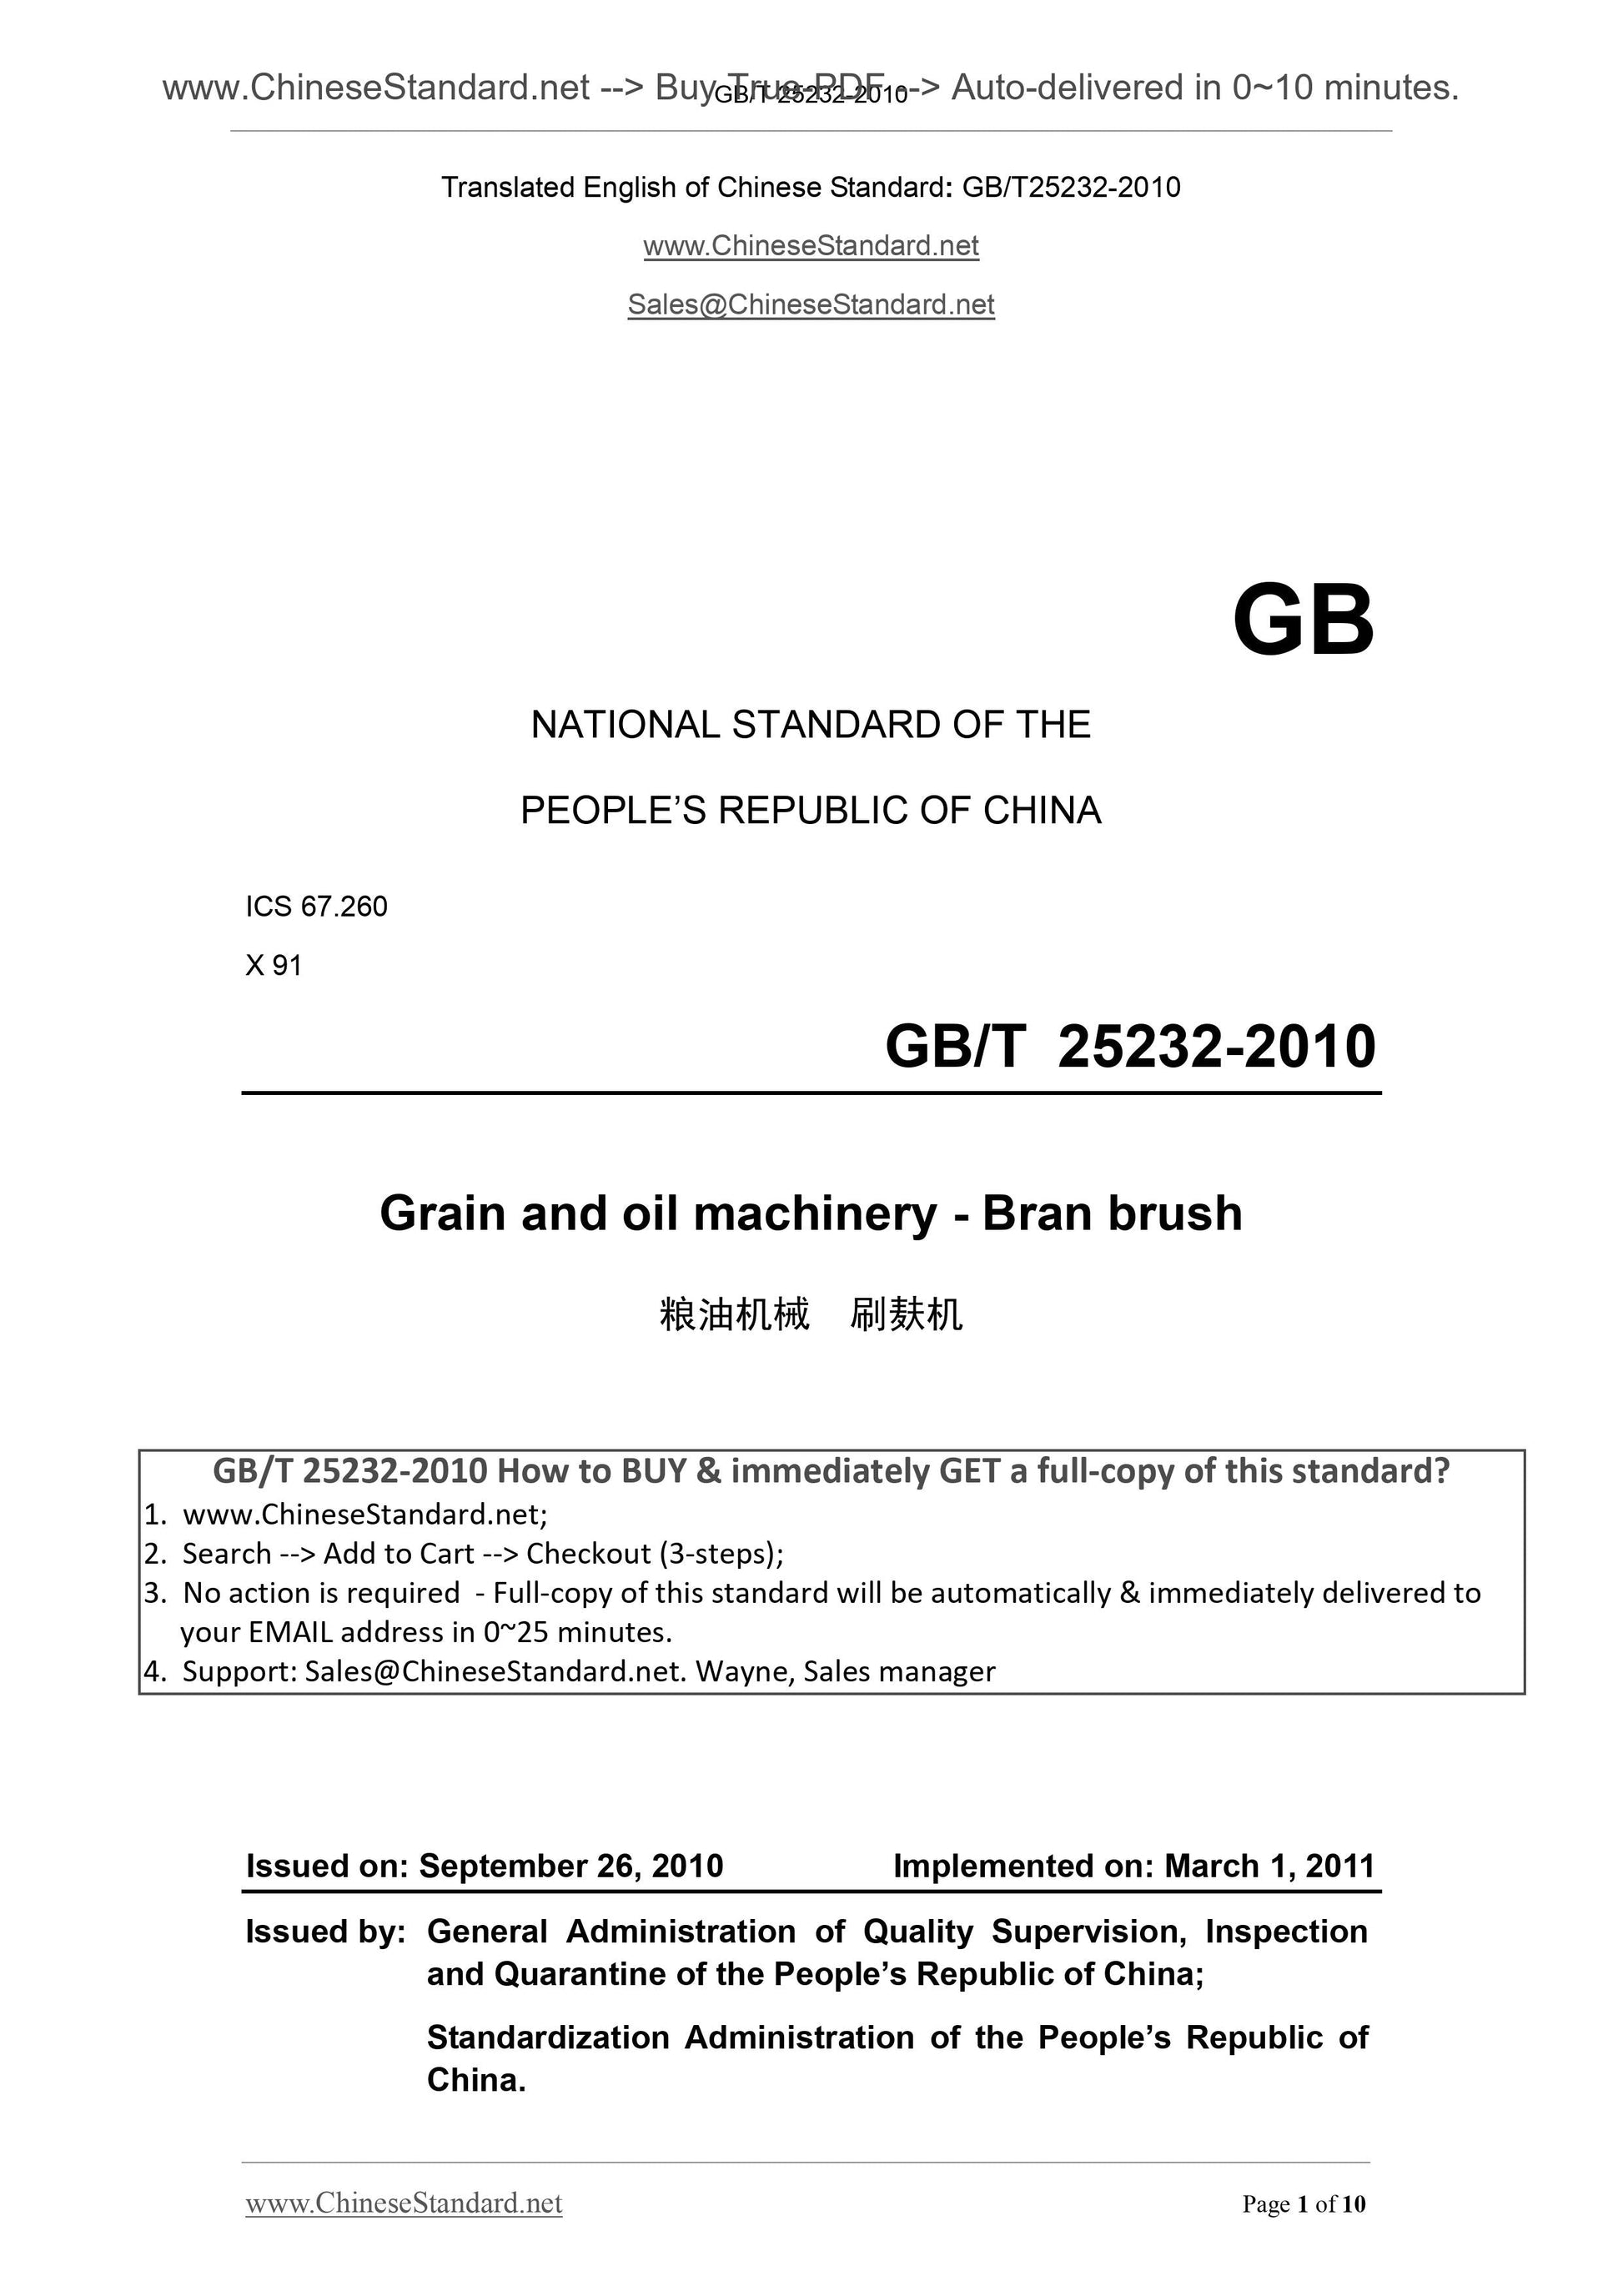 GB/T 25232-2010 Page 1